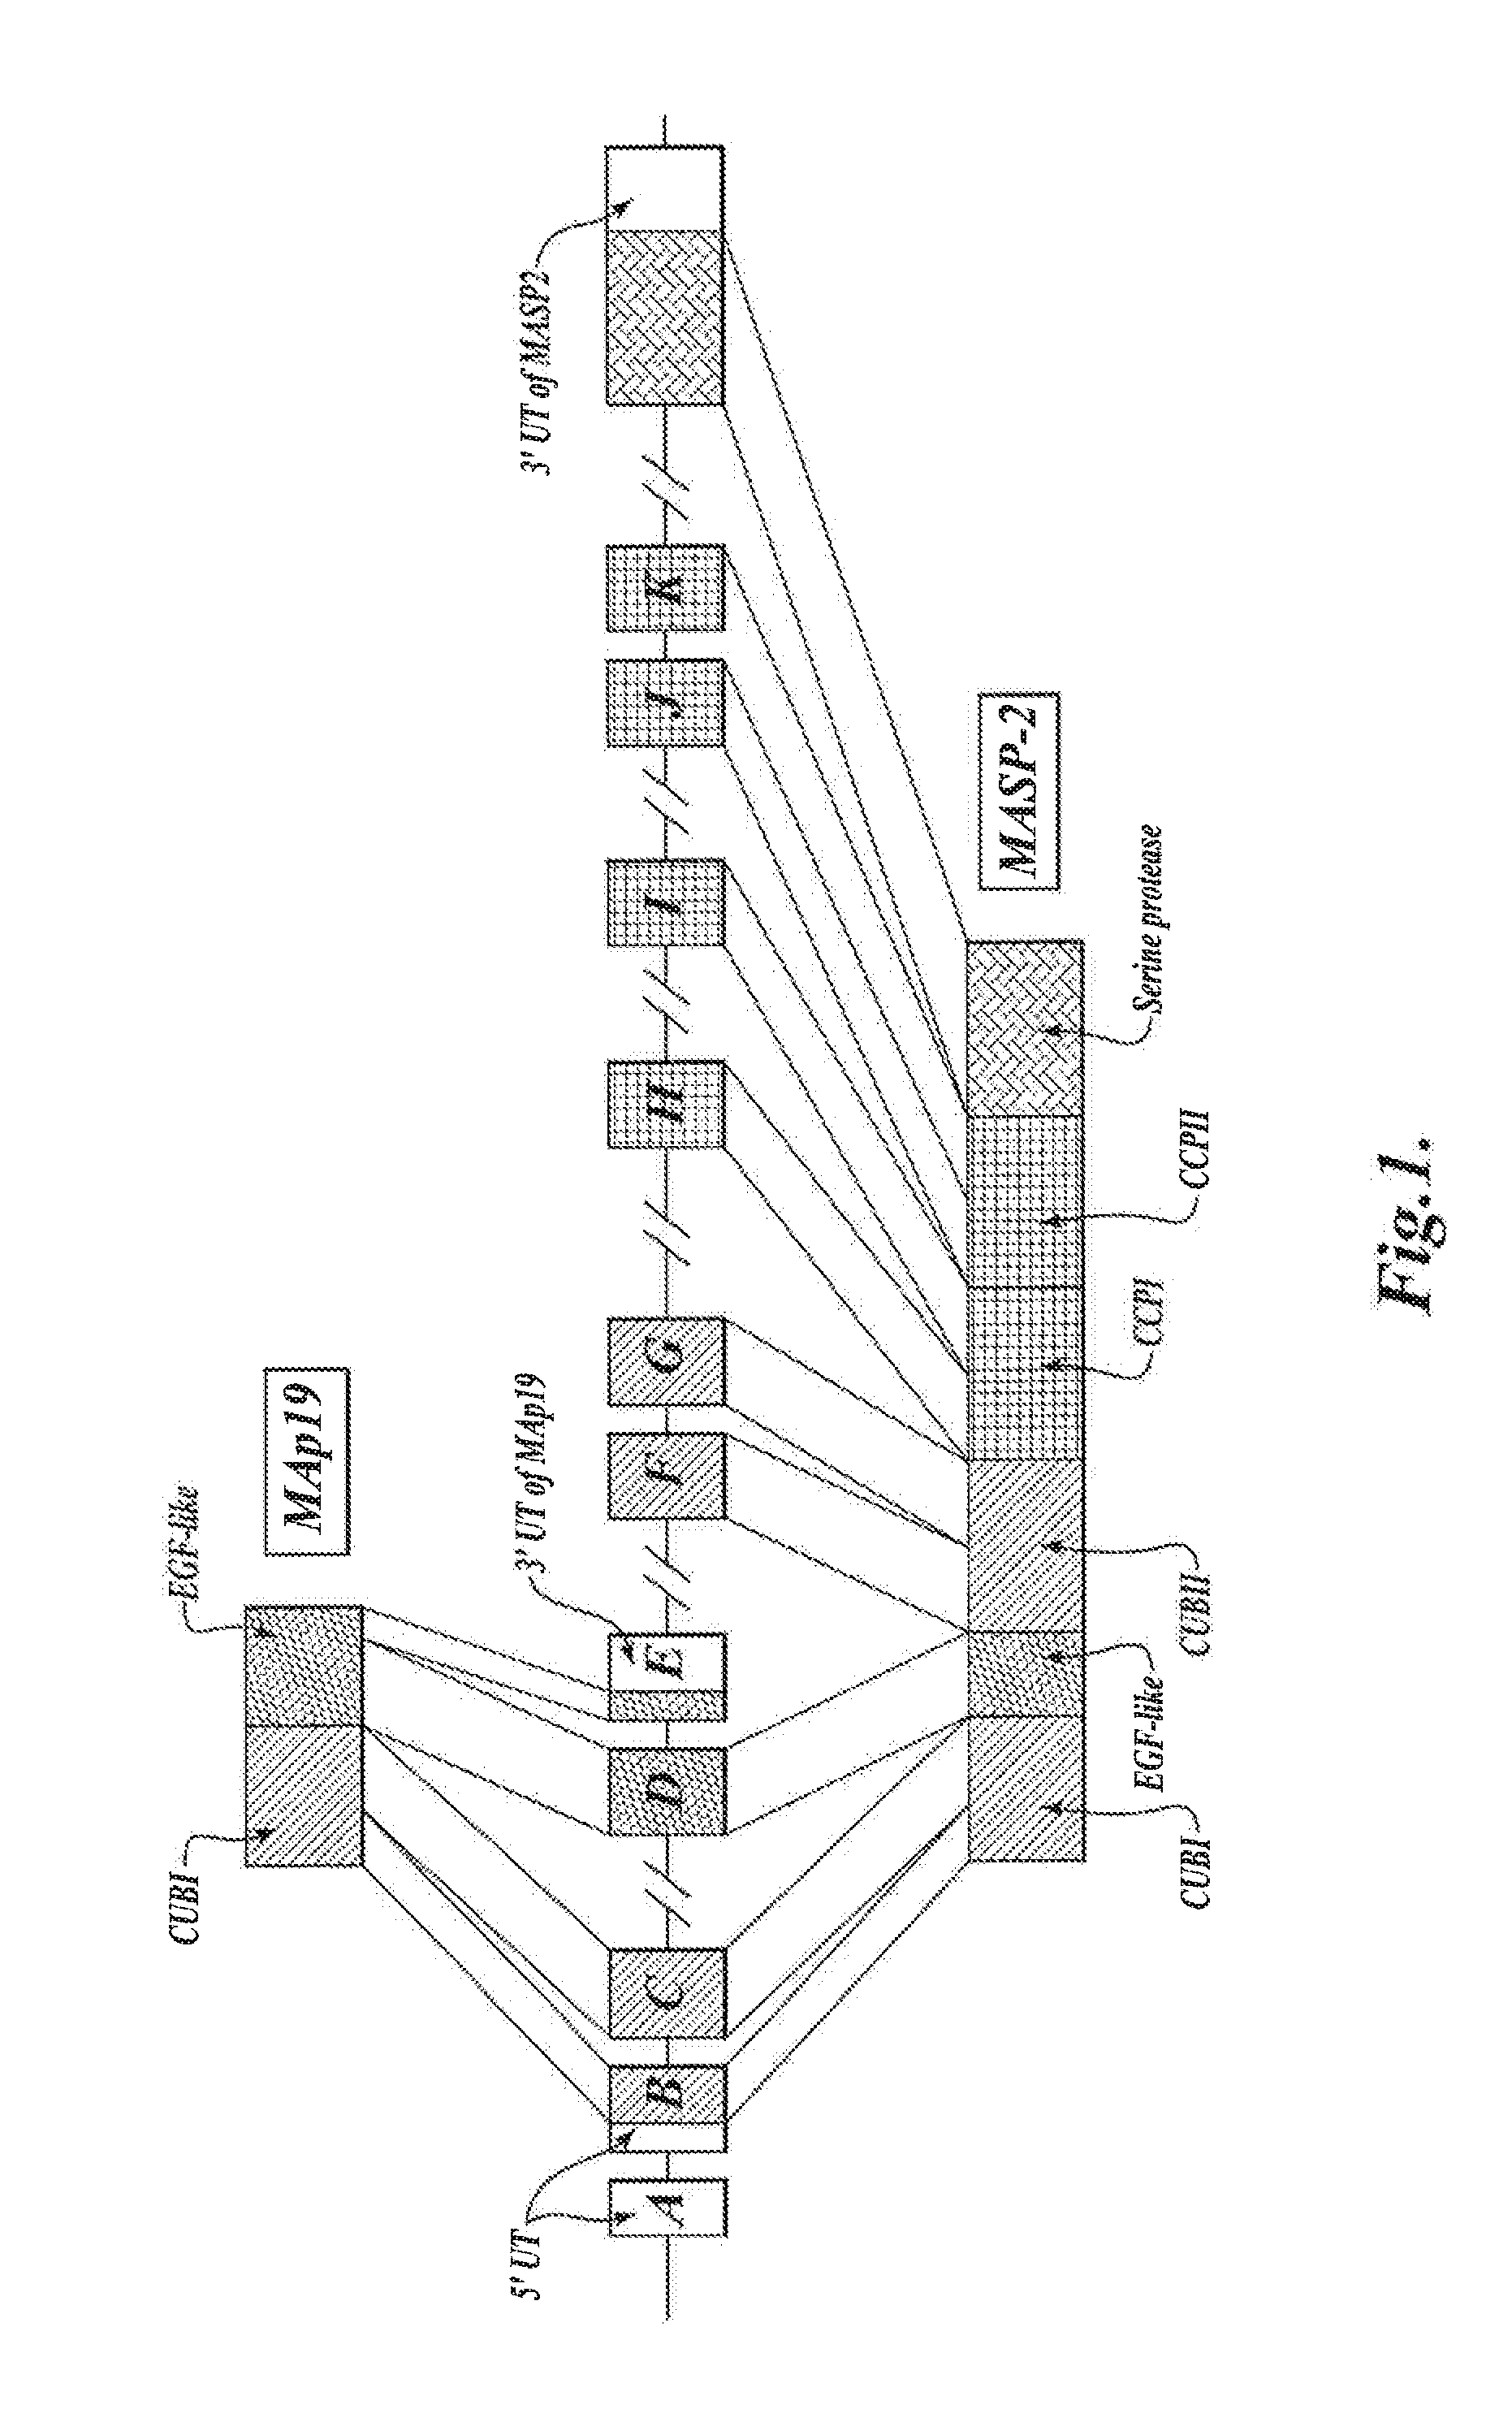 Methods for Treating Conditions Associated with MASP-2 Dependent Complement Activation